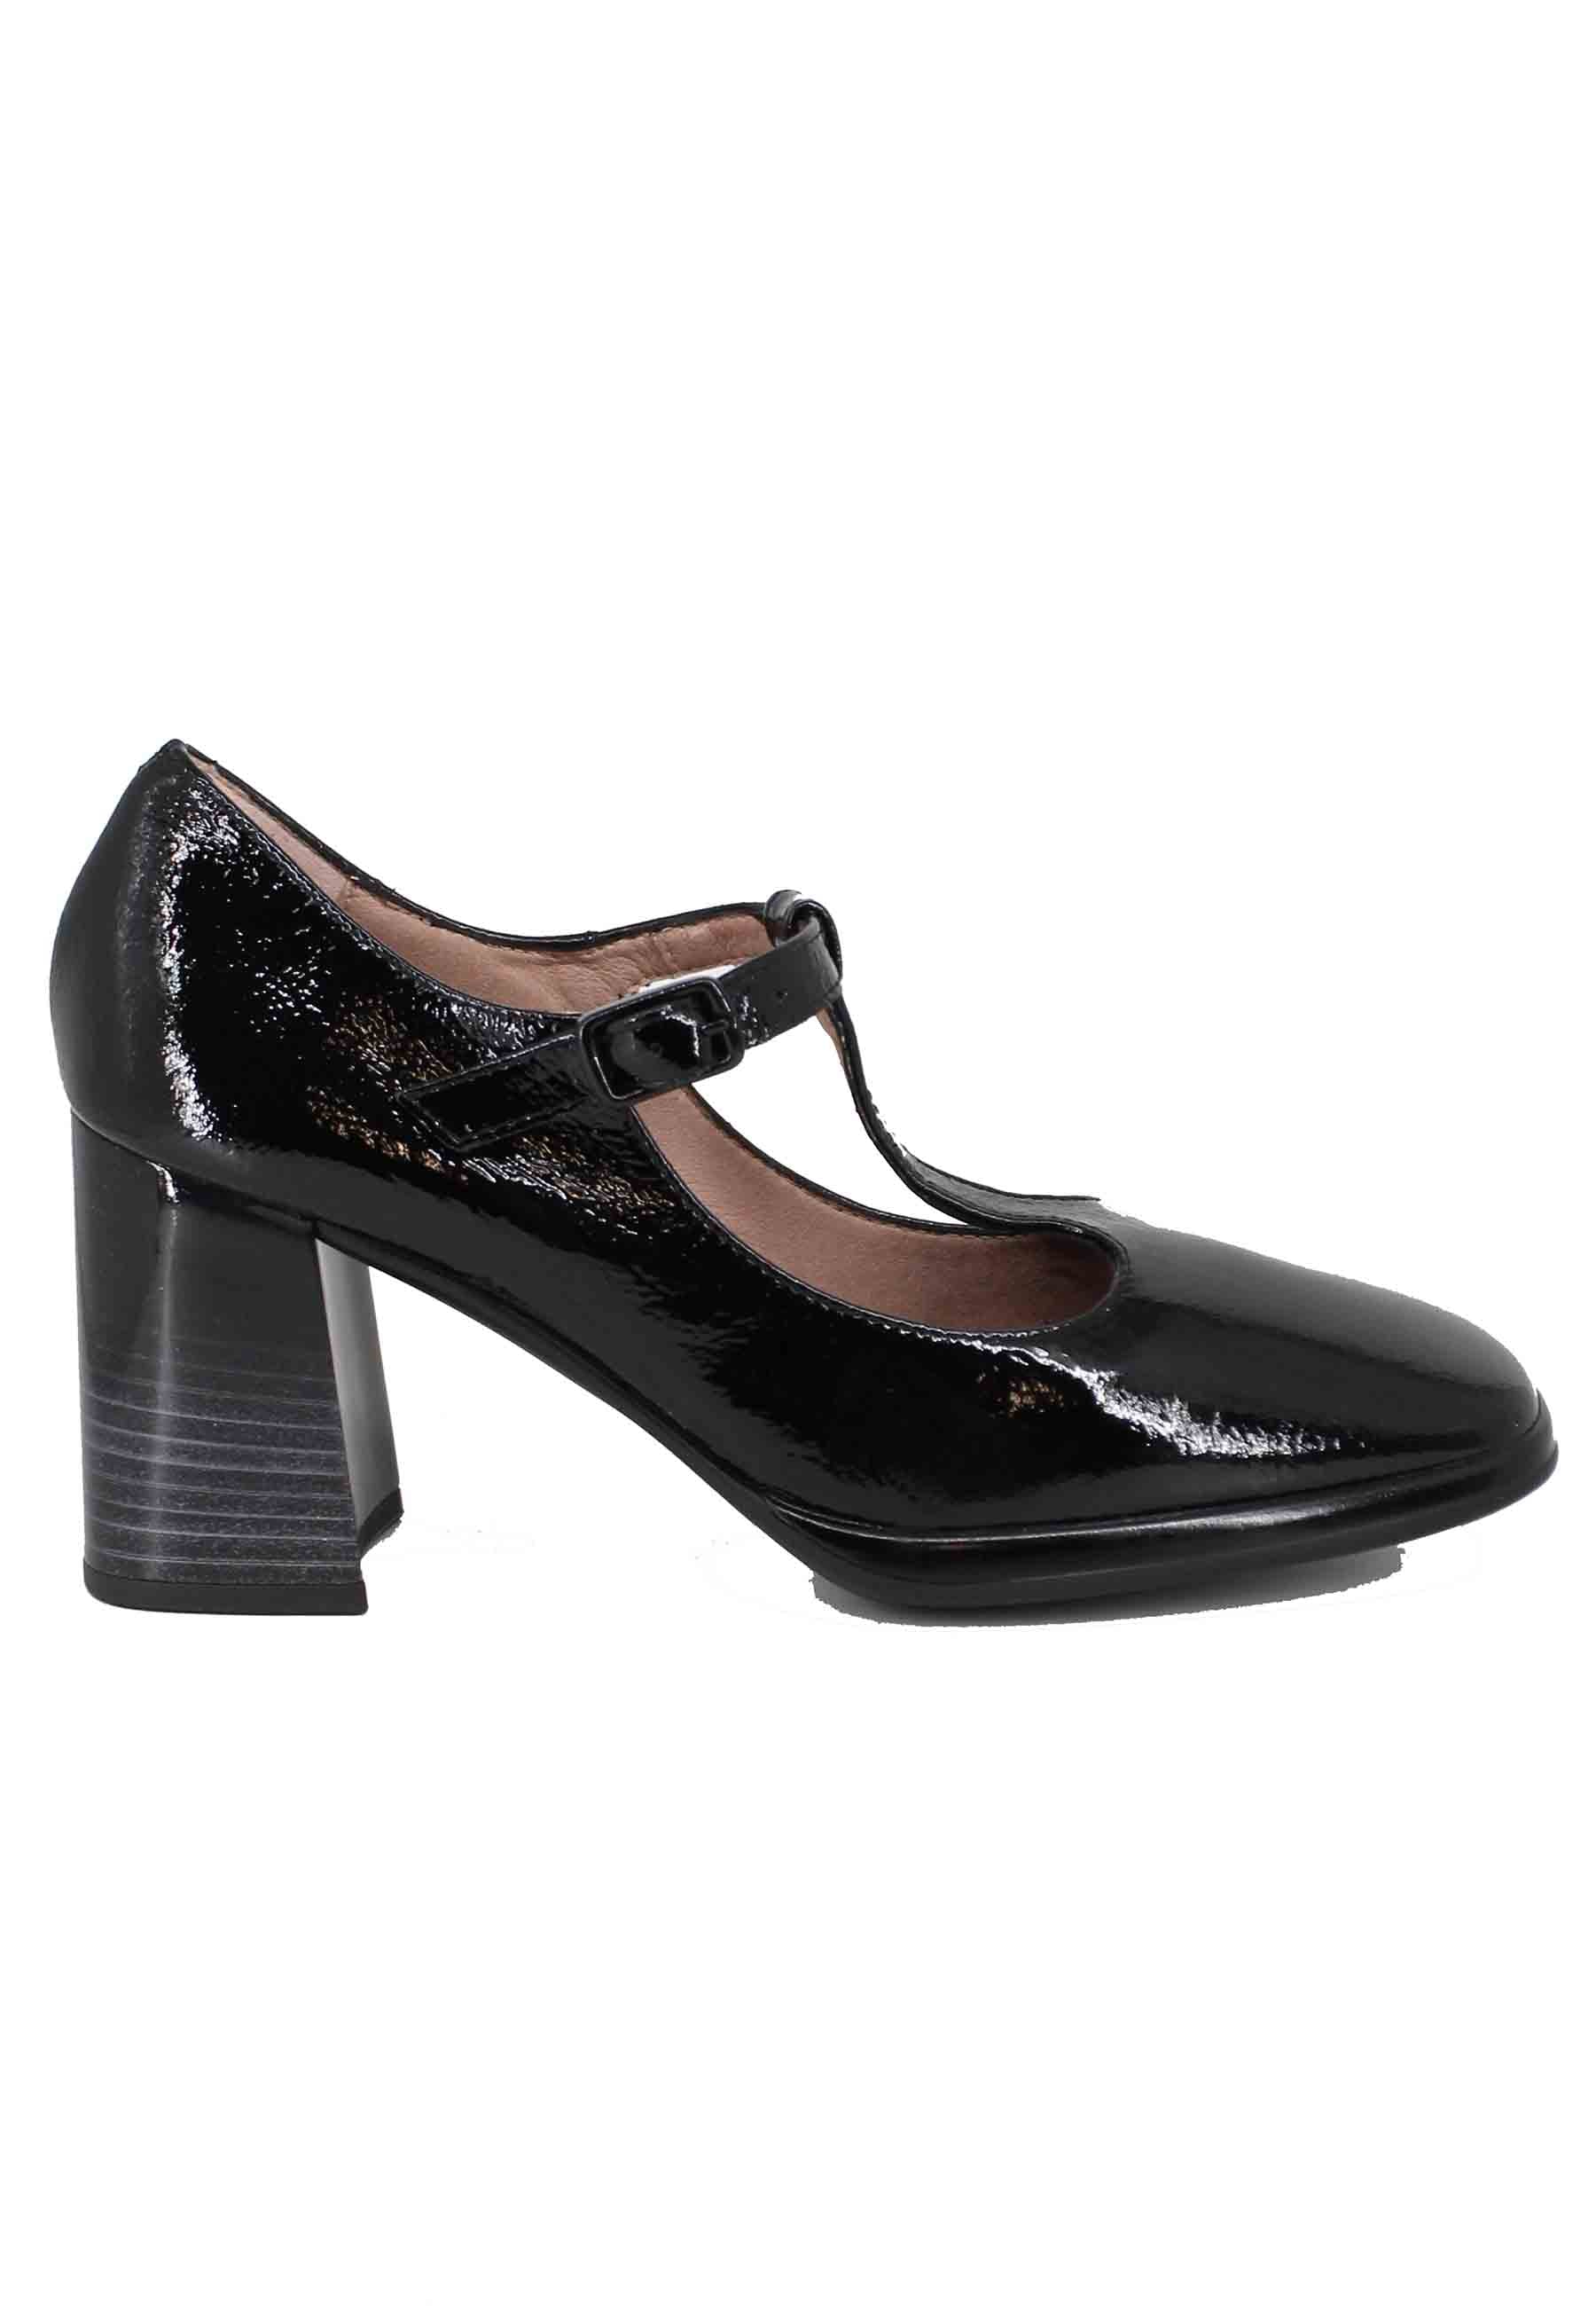 Women's pumps in shiny black leather with straps and high heel